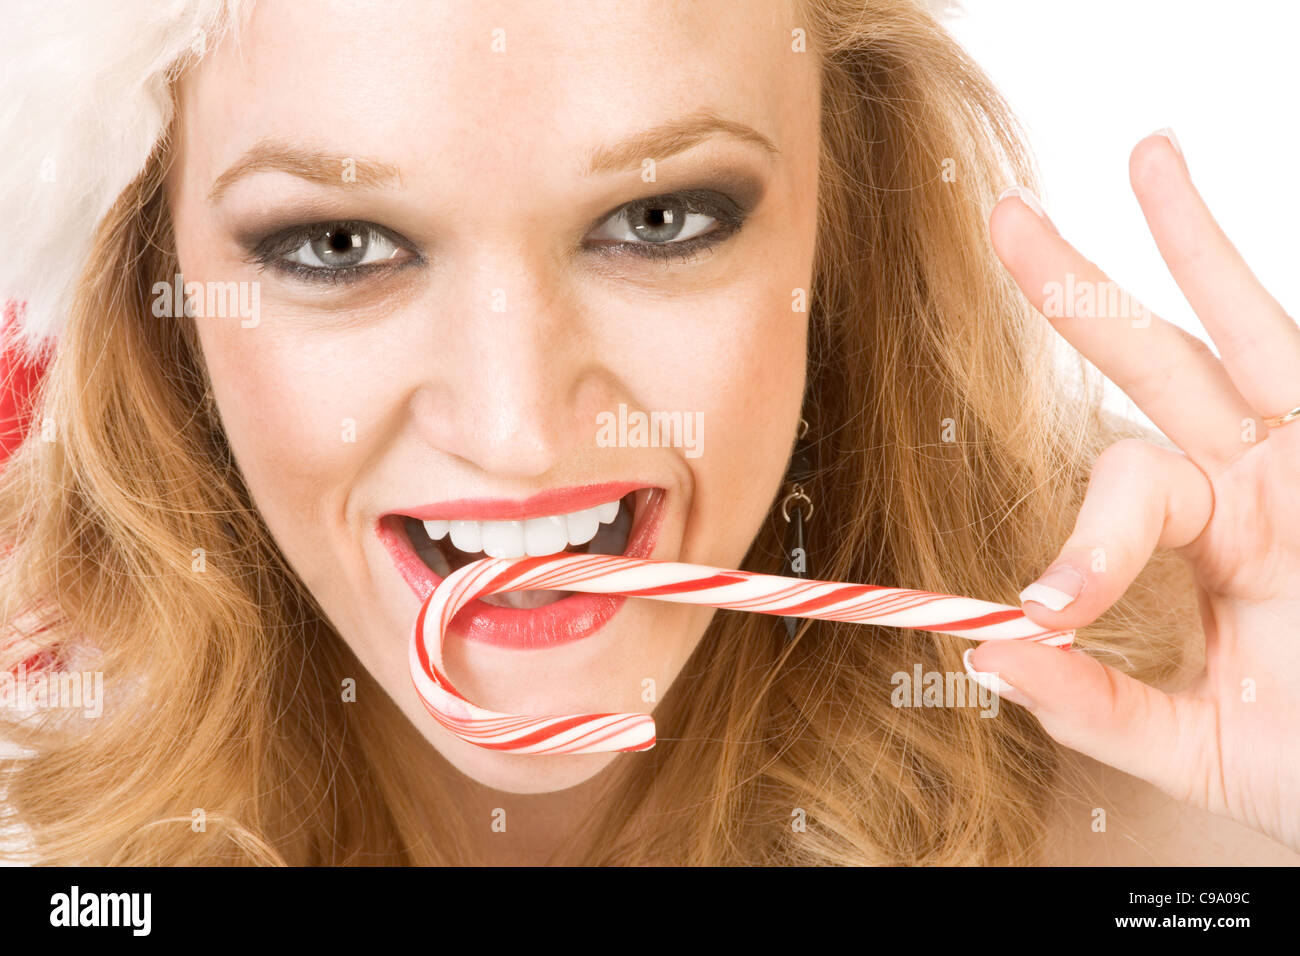 Blond excited pinup woman in Christmas outfit holding candy cane stick Stock Photo